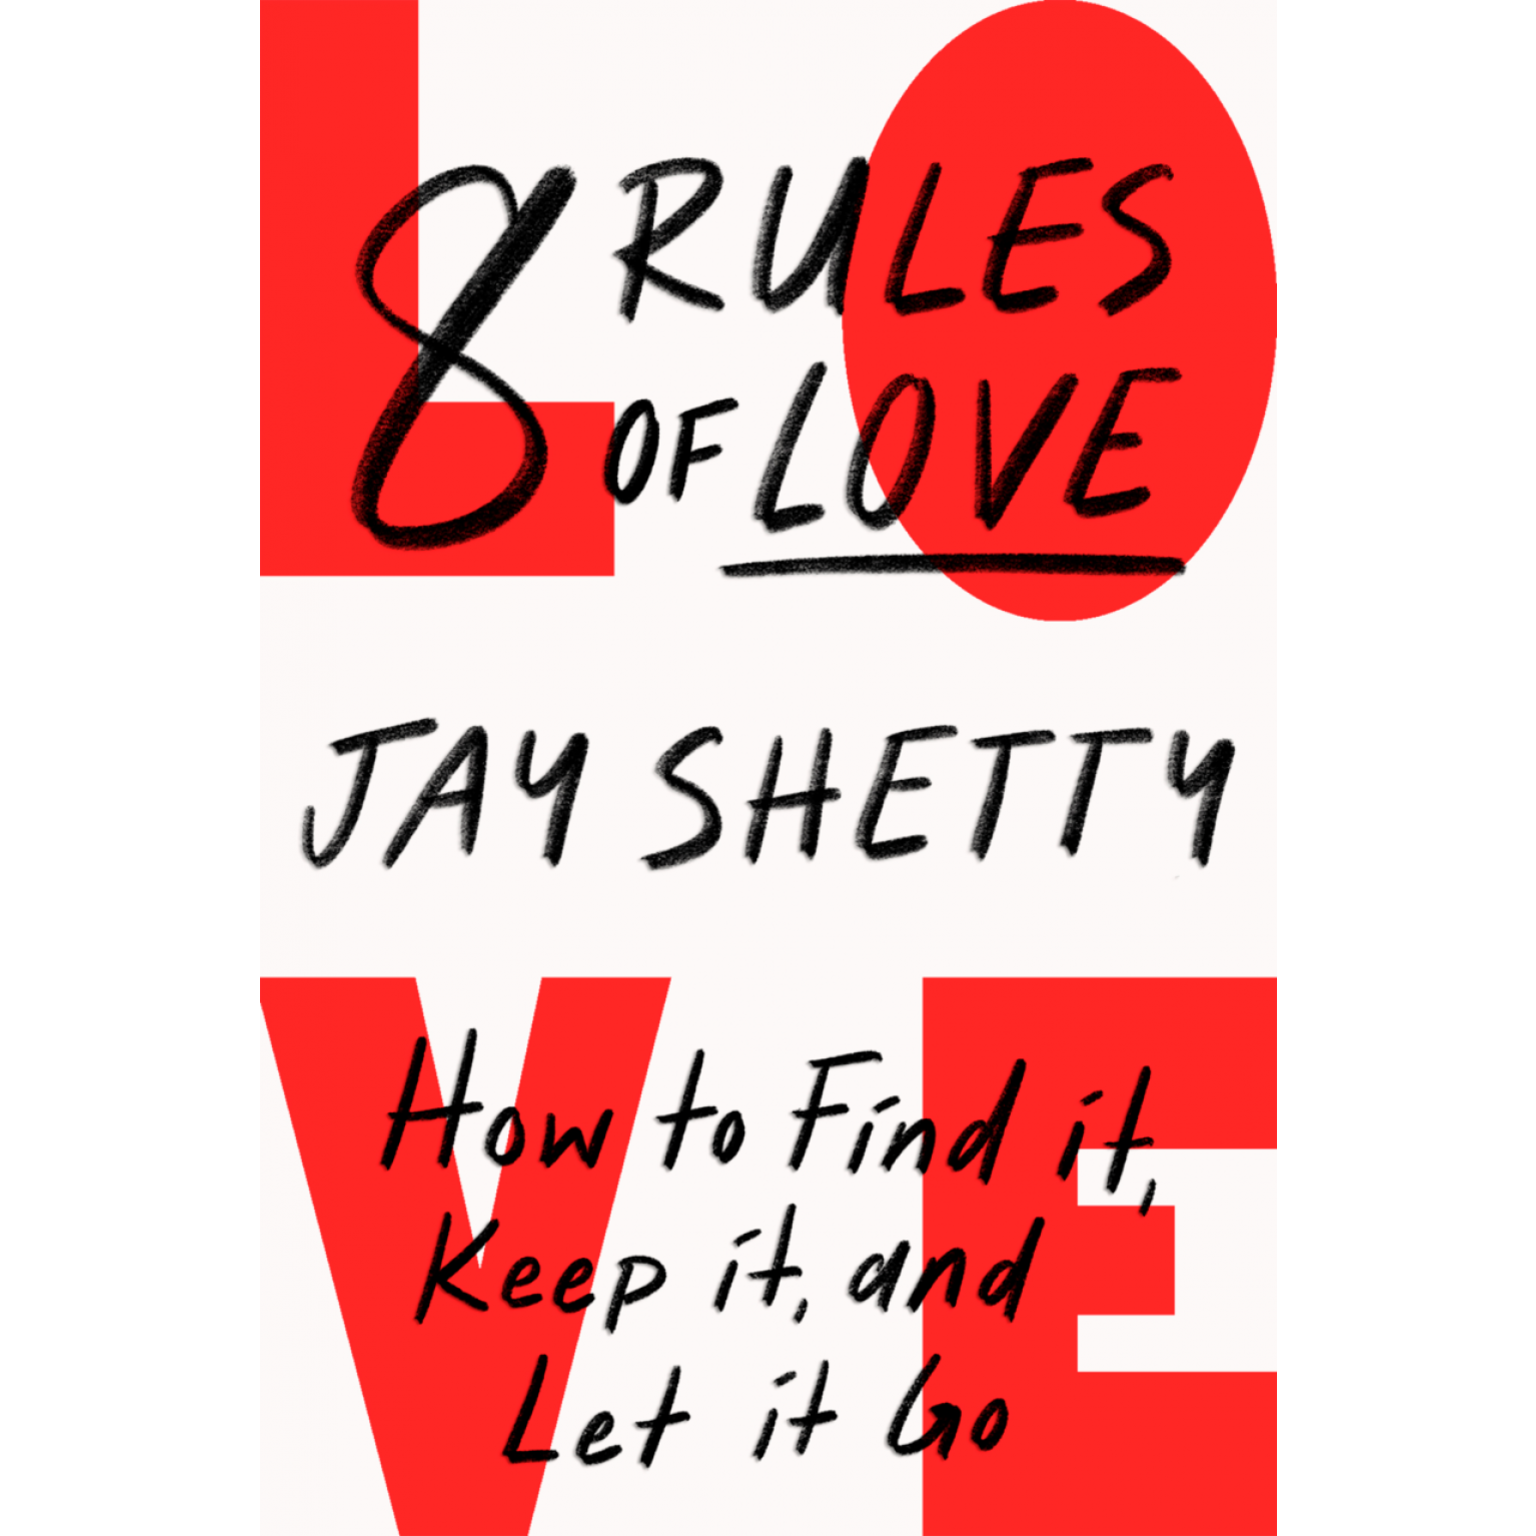 8 RULES OF LOVE: How to Find it, Keep it, and Let it Go - Jay Shetty